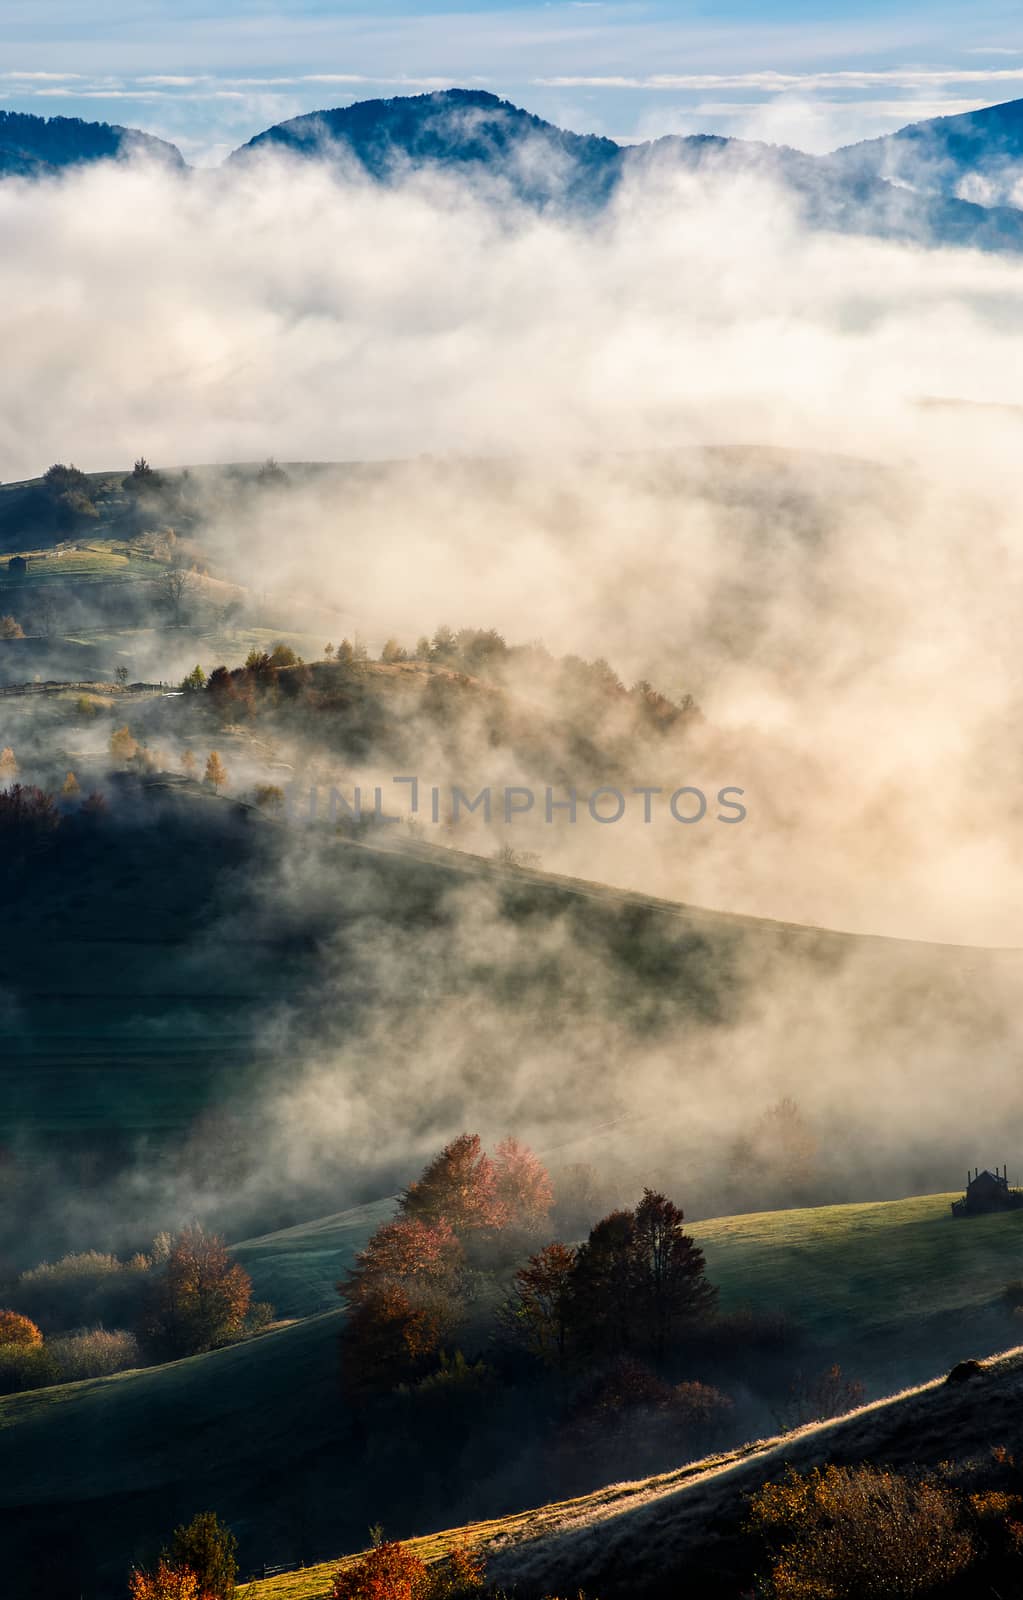 mountain rural area in foggy autumn morning by Pellinni